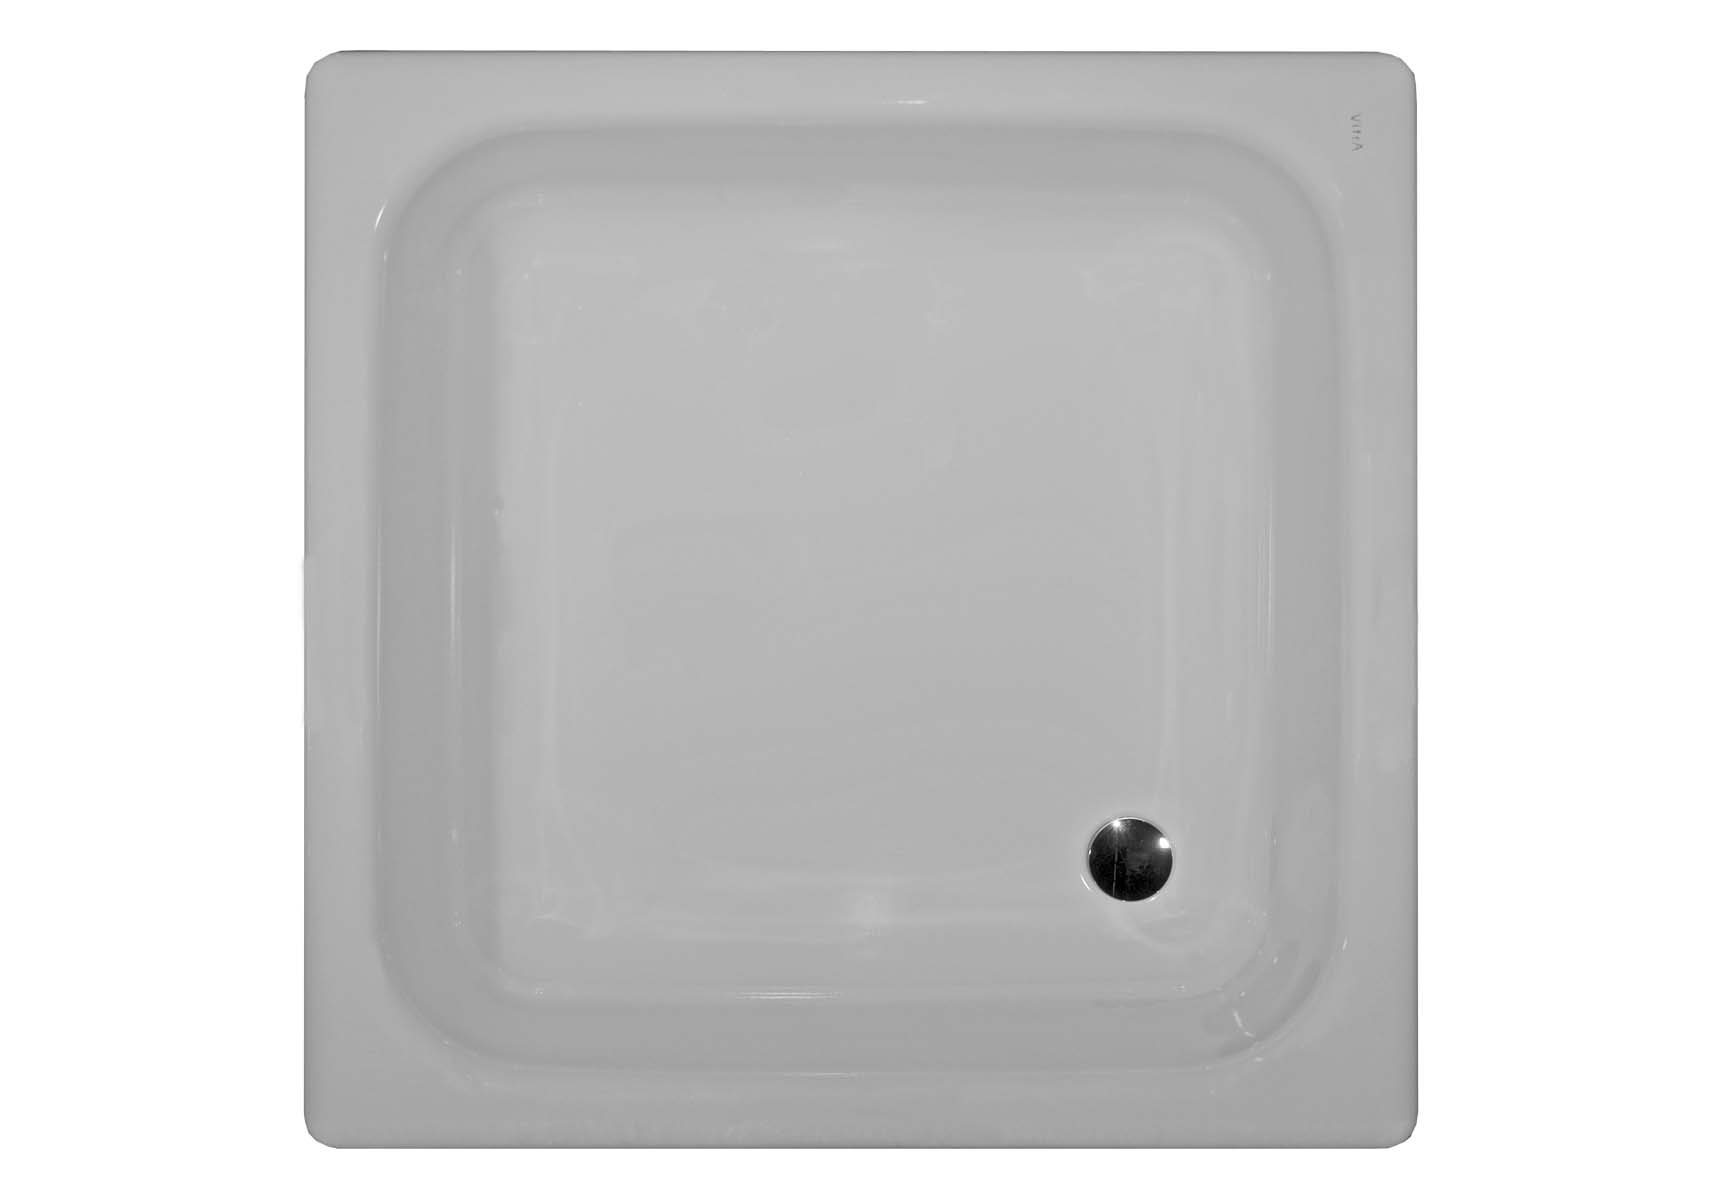 Generic Square 90x75 cm Steel Shower Tray, 3.5 Mm, H:16 cm, 52 Mm Waste, Sound Proofing Pad